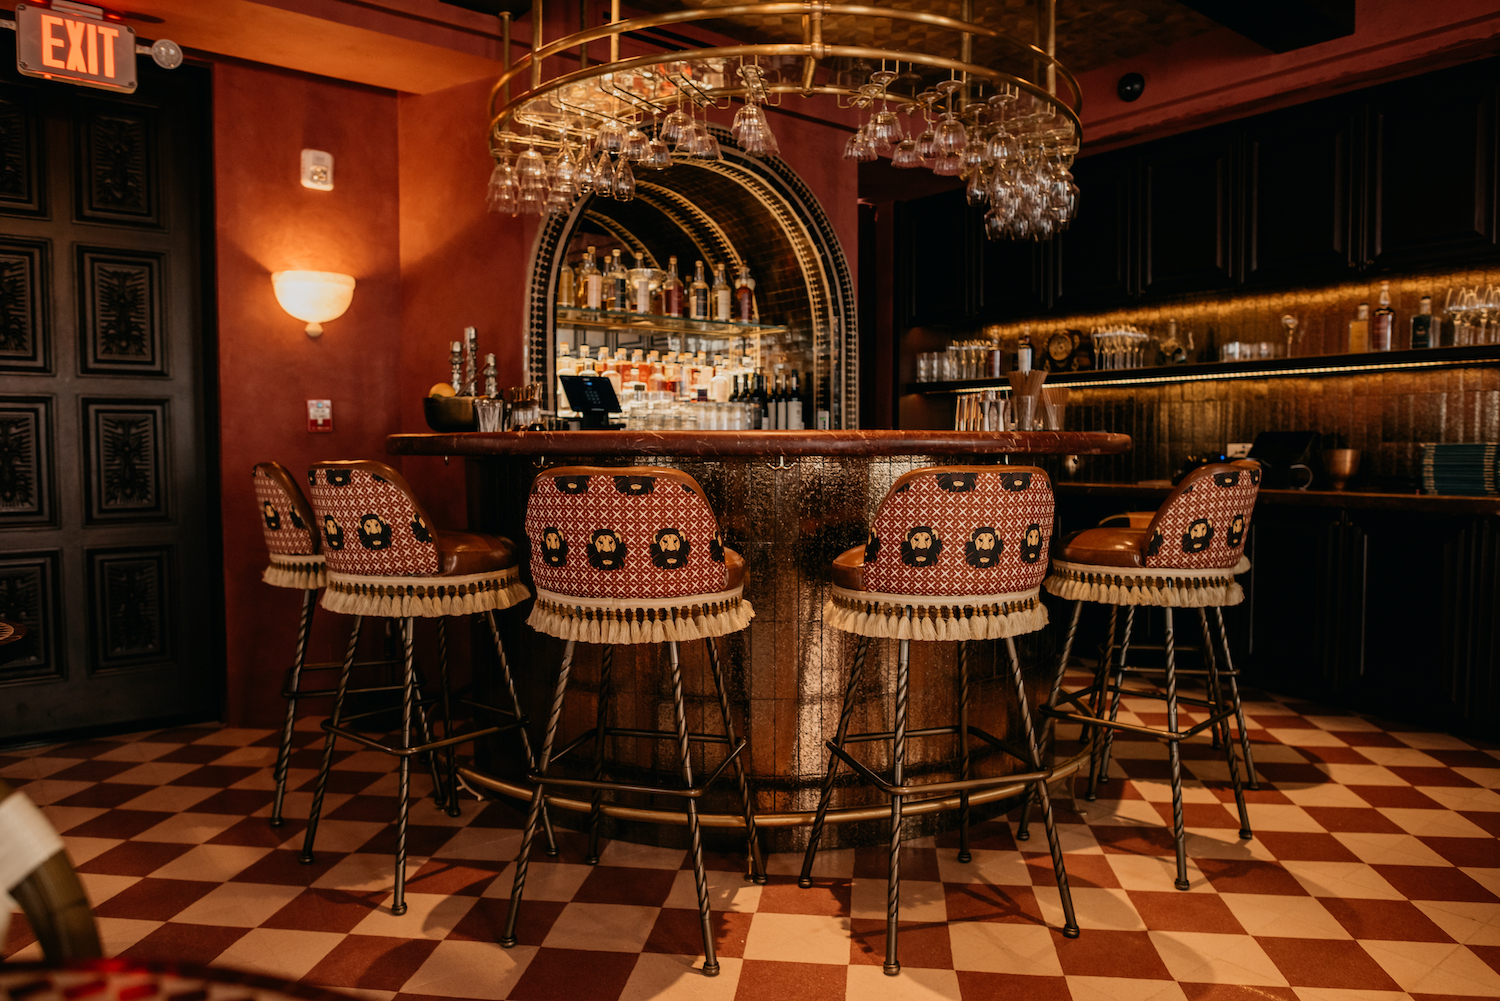 a bar with a red and white tiled floor with tasseled chairs